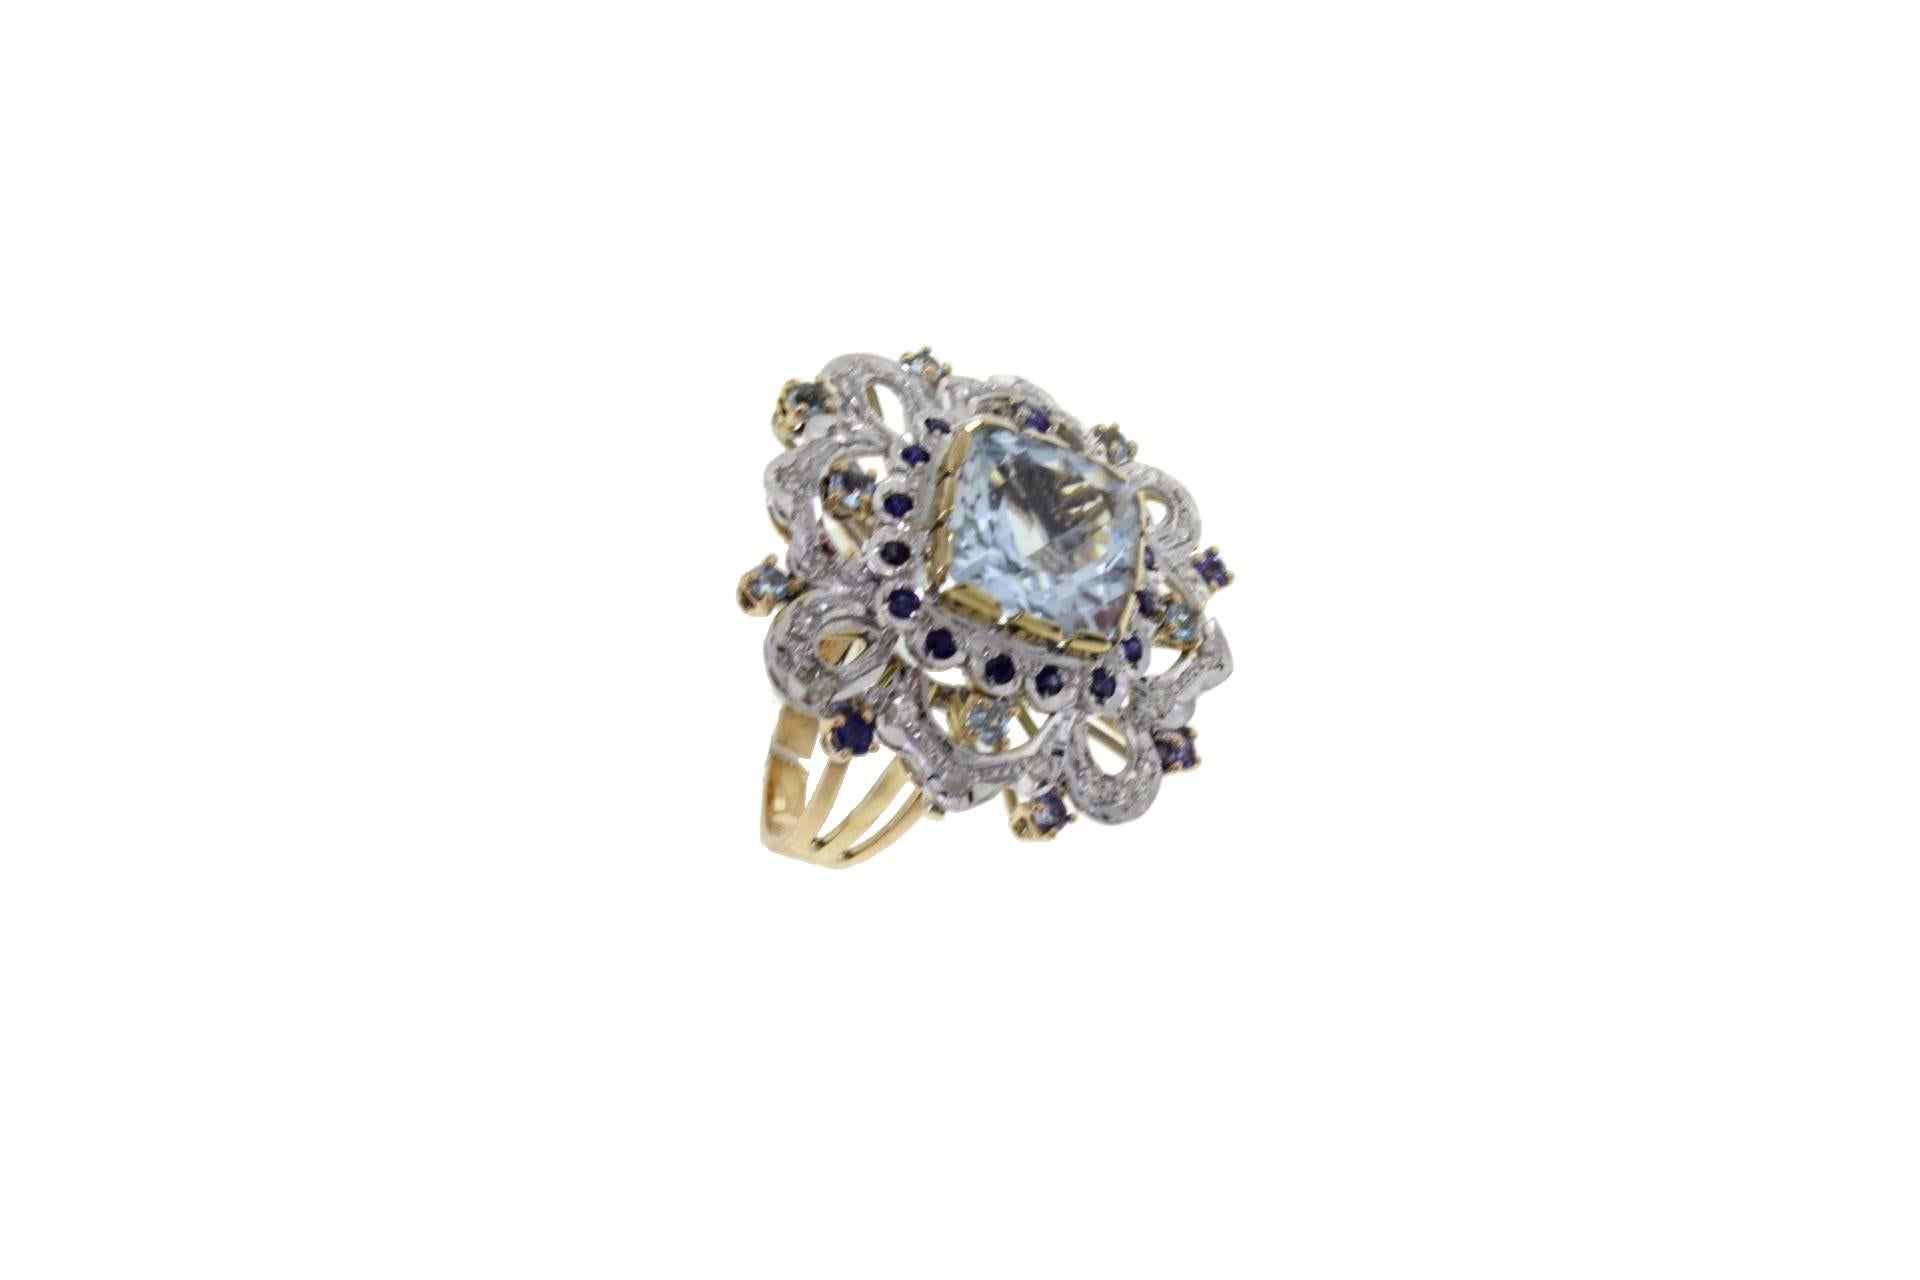 Cocktail ring in 14kt yellow and white gold composed of a central aquamarine surrounded by diamonds and blue sapphires.The origin of this ring goes back to the 1950s. It was totally handmade by Italian master goldsmiths and it is in perfect